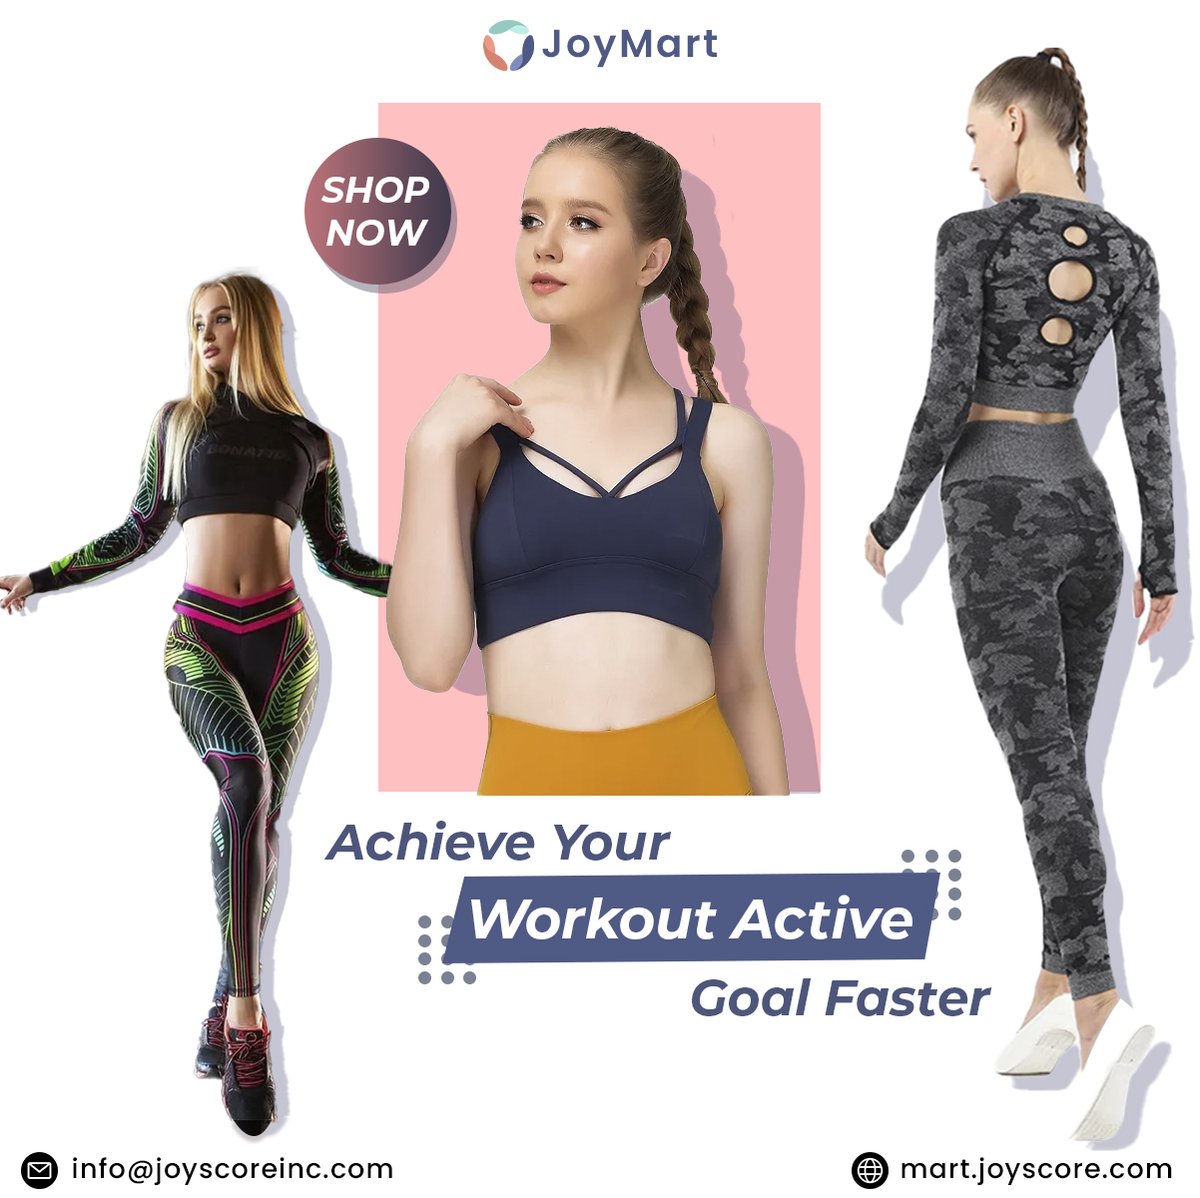 Gear up and Get Active! 💪 Dive into our latest collection of stylish activewear now available online. Your journey to fitness starts here

#leggingsoutfit #fitnesscoach #gymmotivation #workoutroutine #FitnessMotivation2024
#fitnesscoach #fashionphotography #fitfam